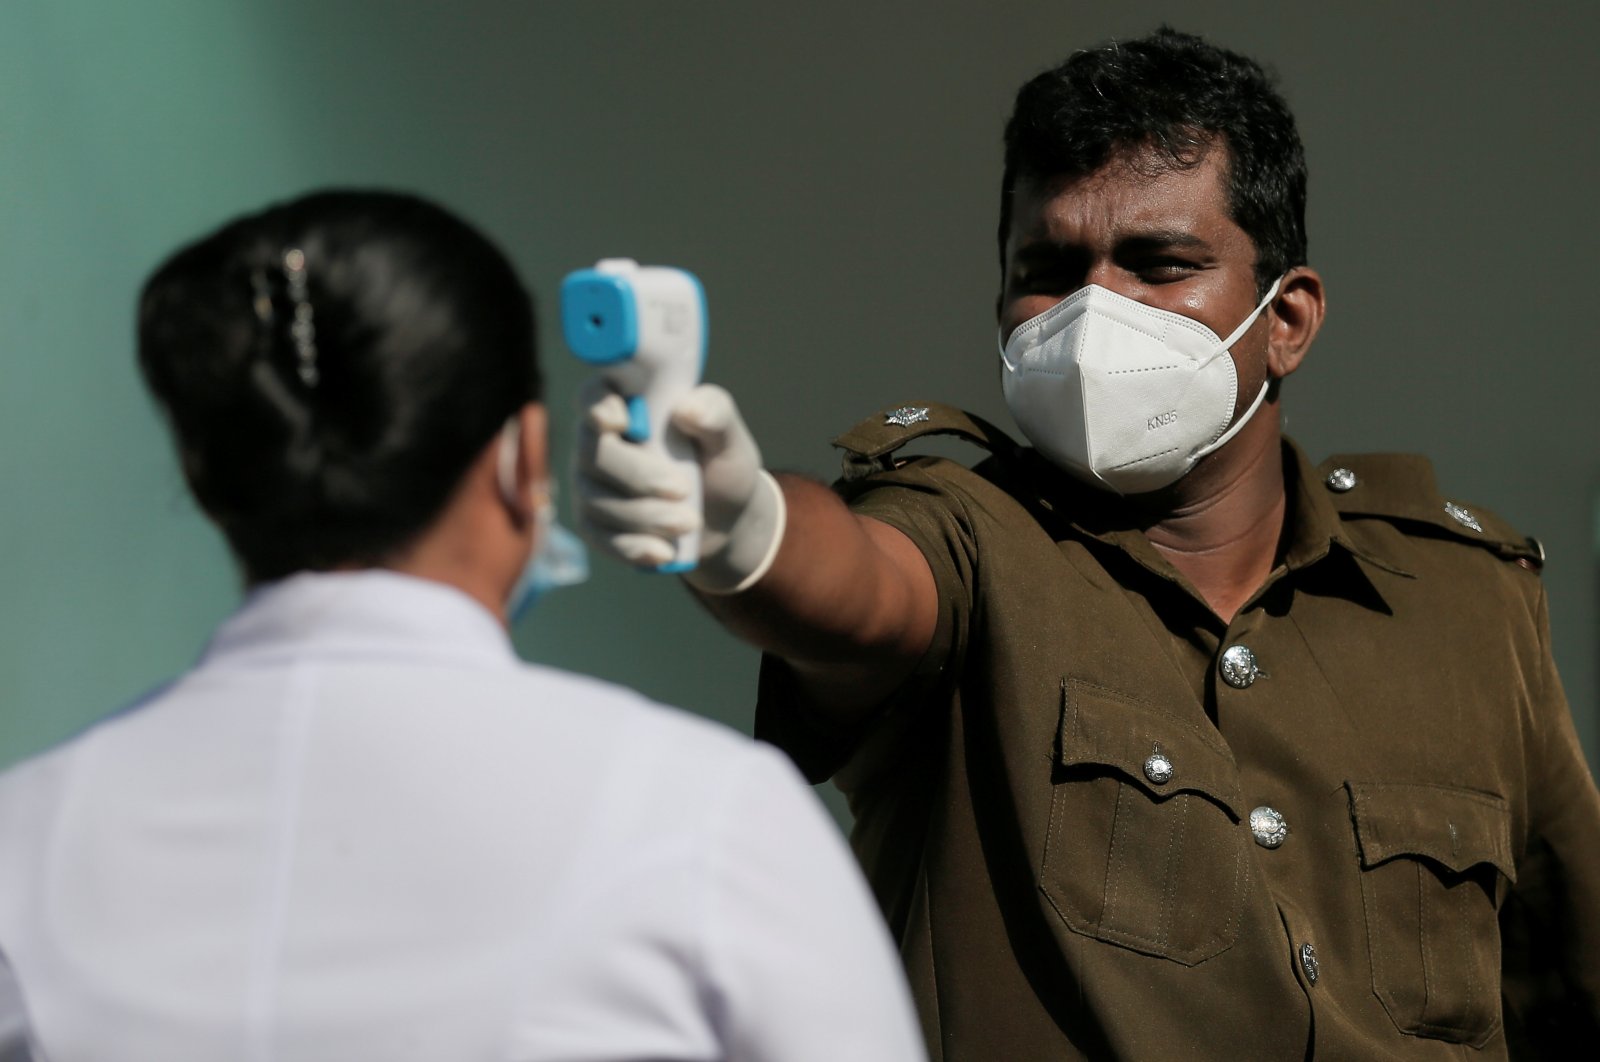 A health official uses a thermometer to take the temperature of a health care worker during a simulation exercise for the coronavirus vaccination in the suburb of Piliyandala, south of Colombo, Sri Lanka, Jan. 23, 2021. (Reuters Photo)